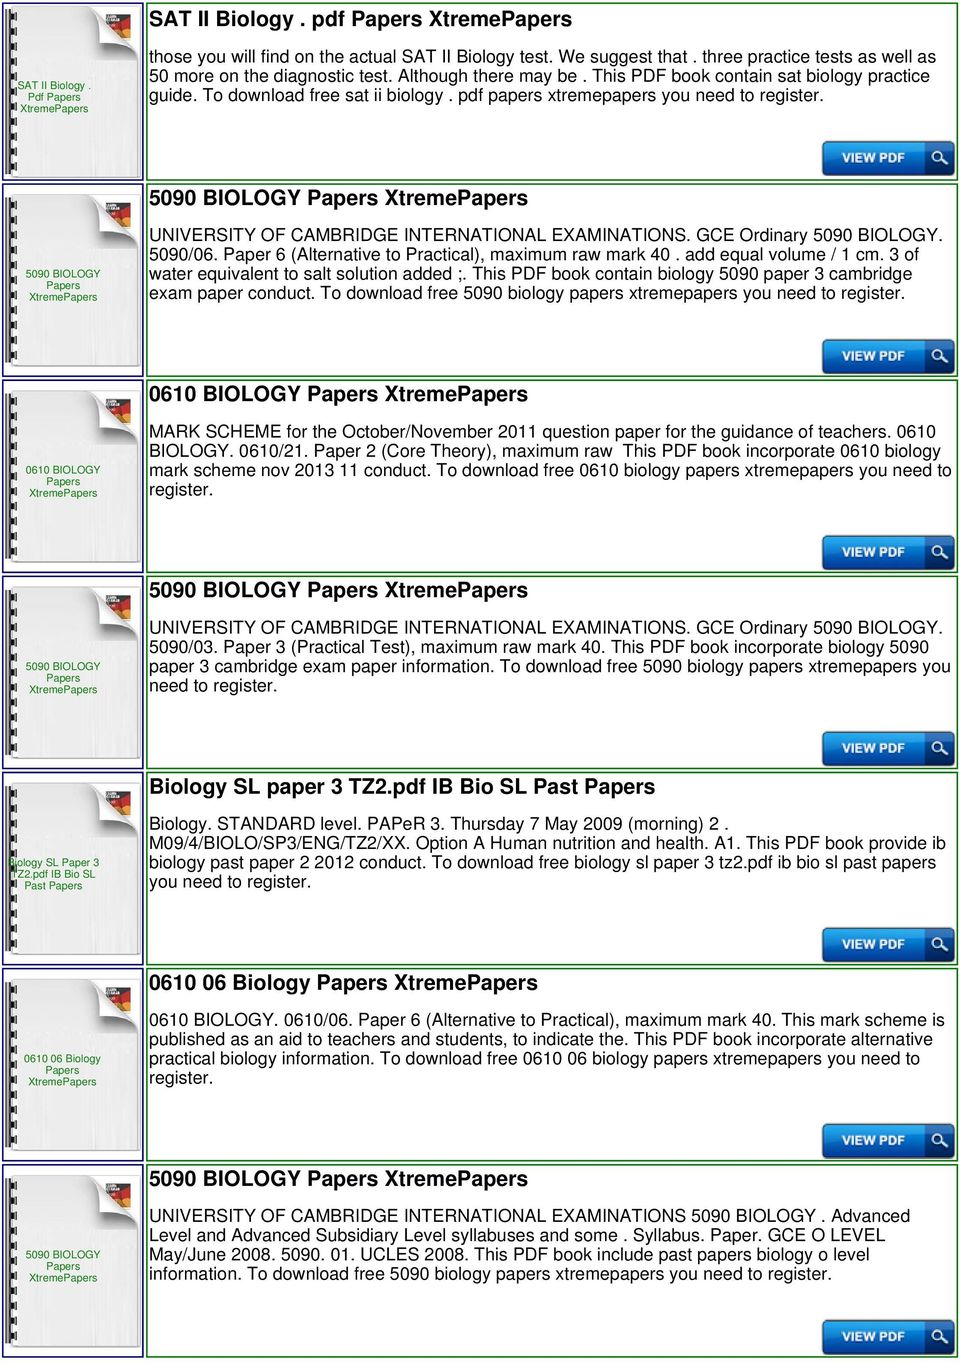 pdf papers xtremepapers you need to Xtreme Xtreme UNIVERSITY OF CAMBRIDGE INTERNATIONAL EXAMINATIONS. GCE Ordinary. 5090/06. Paper 6 (Alternative to Practical), maximum raw mark 40.